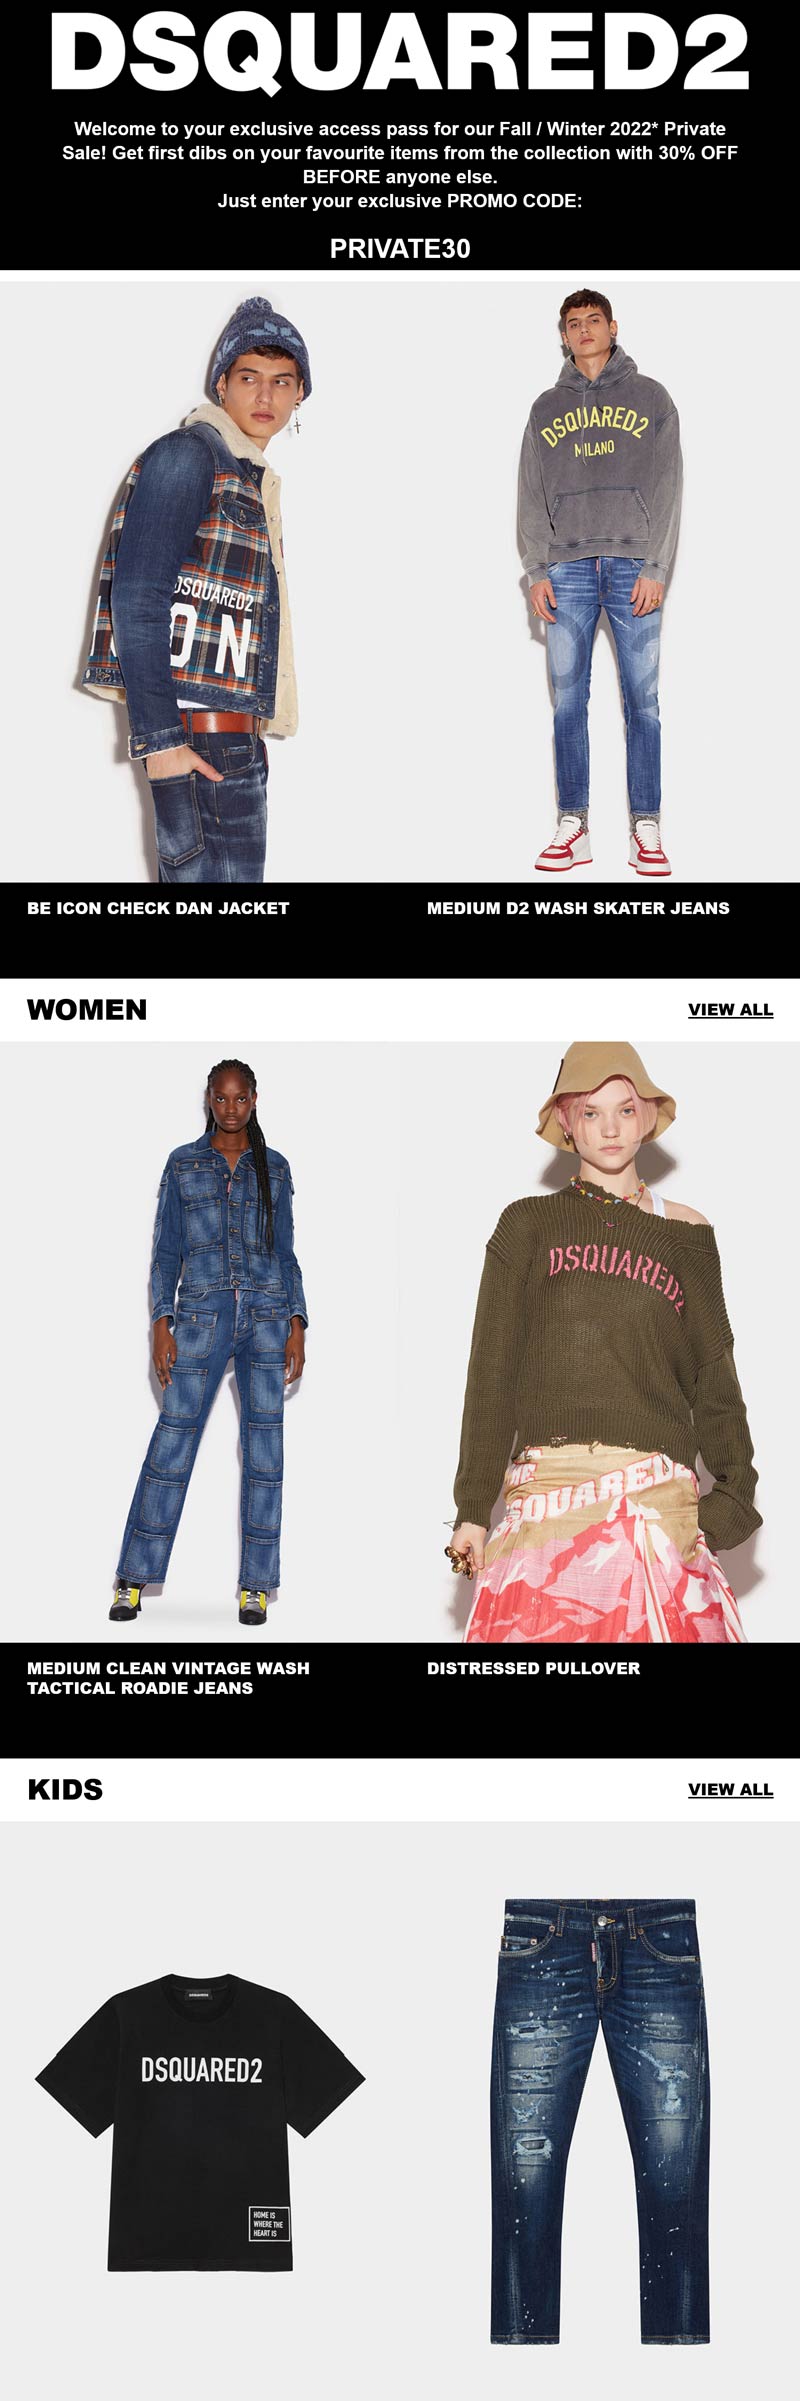 DSQUARED2 stores Coupon  30% off Fall & Winter at DSQUARED2 via promo code PRIVATE30 #dsquared2 